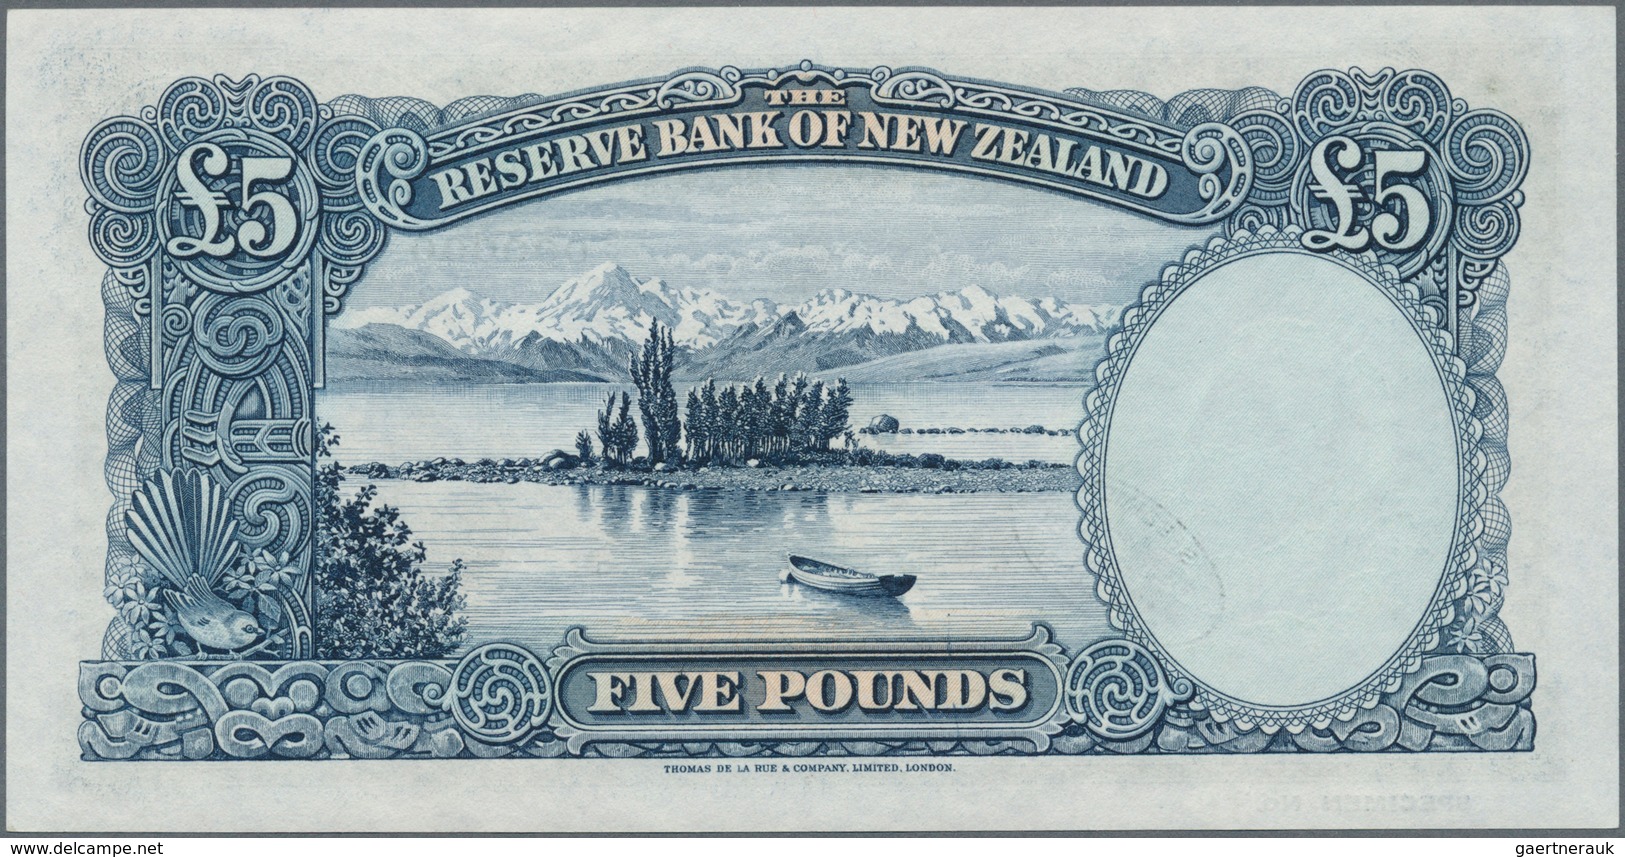 02116 New Zealand / Neuseeland: very rare Set of 5 SPECIMEN banknotes from 1 to 10 Pounds ND(1940-55) sign